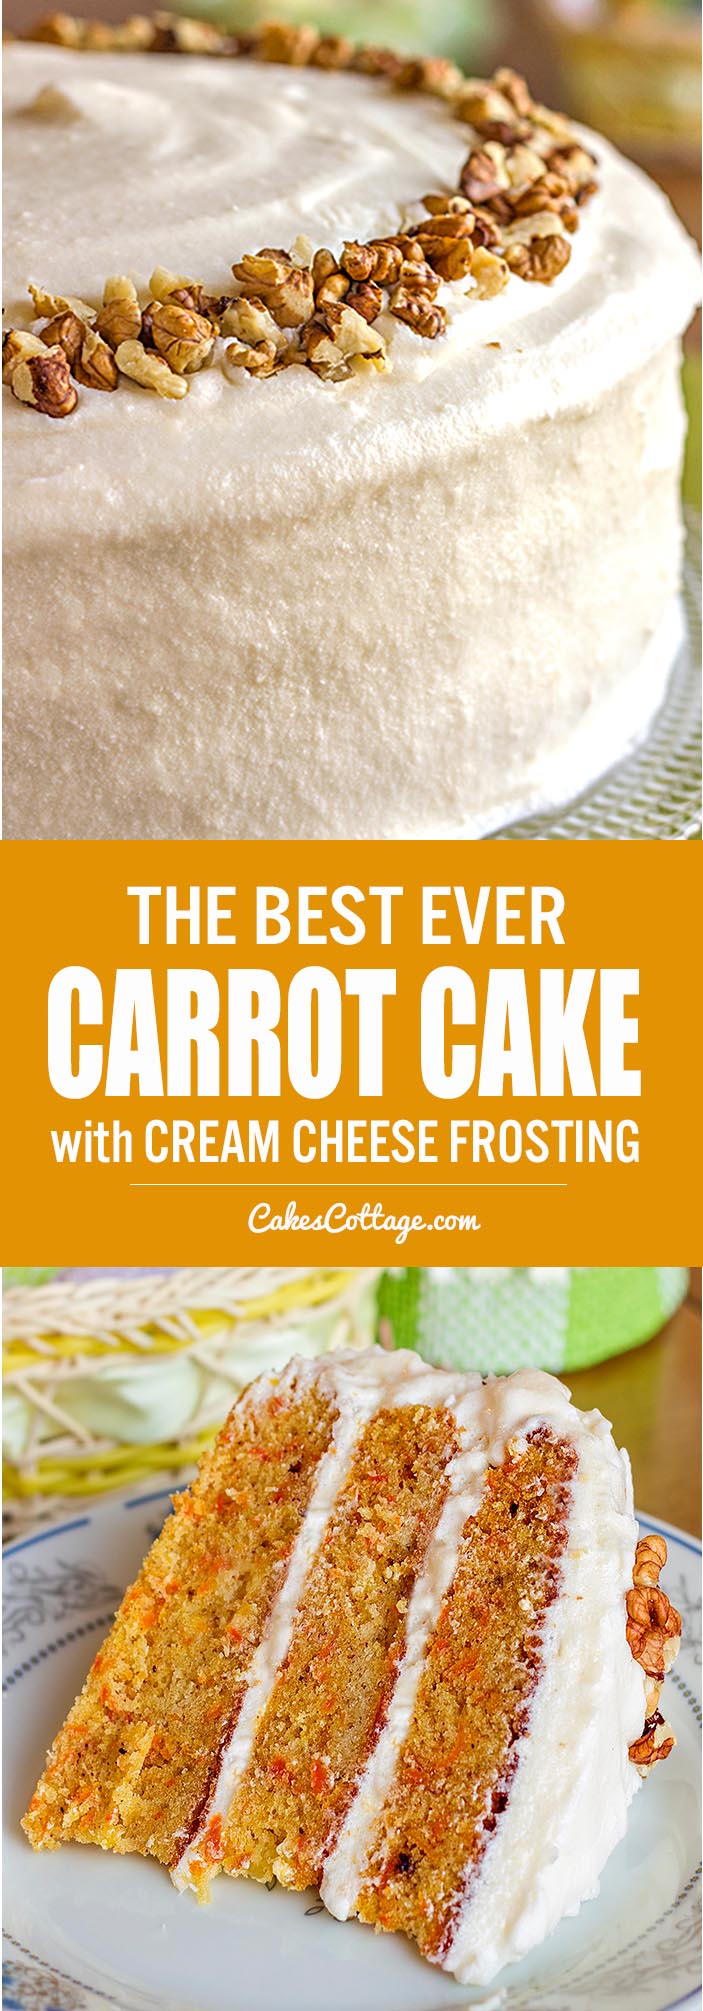 Our family favorite carrot cake recipe, with walnuts, pineapple, and a cream cheese frosting.